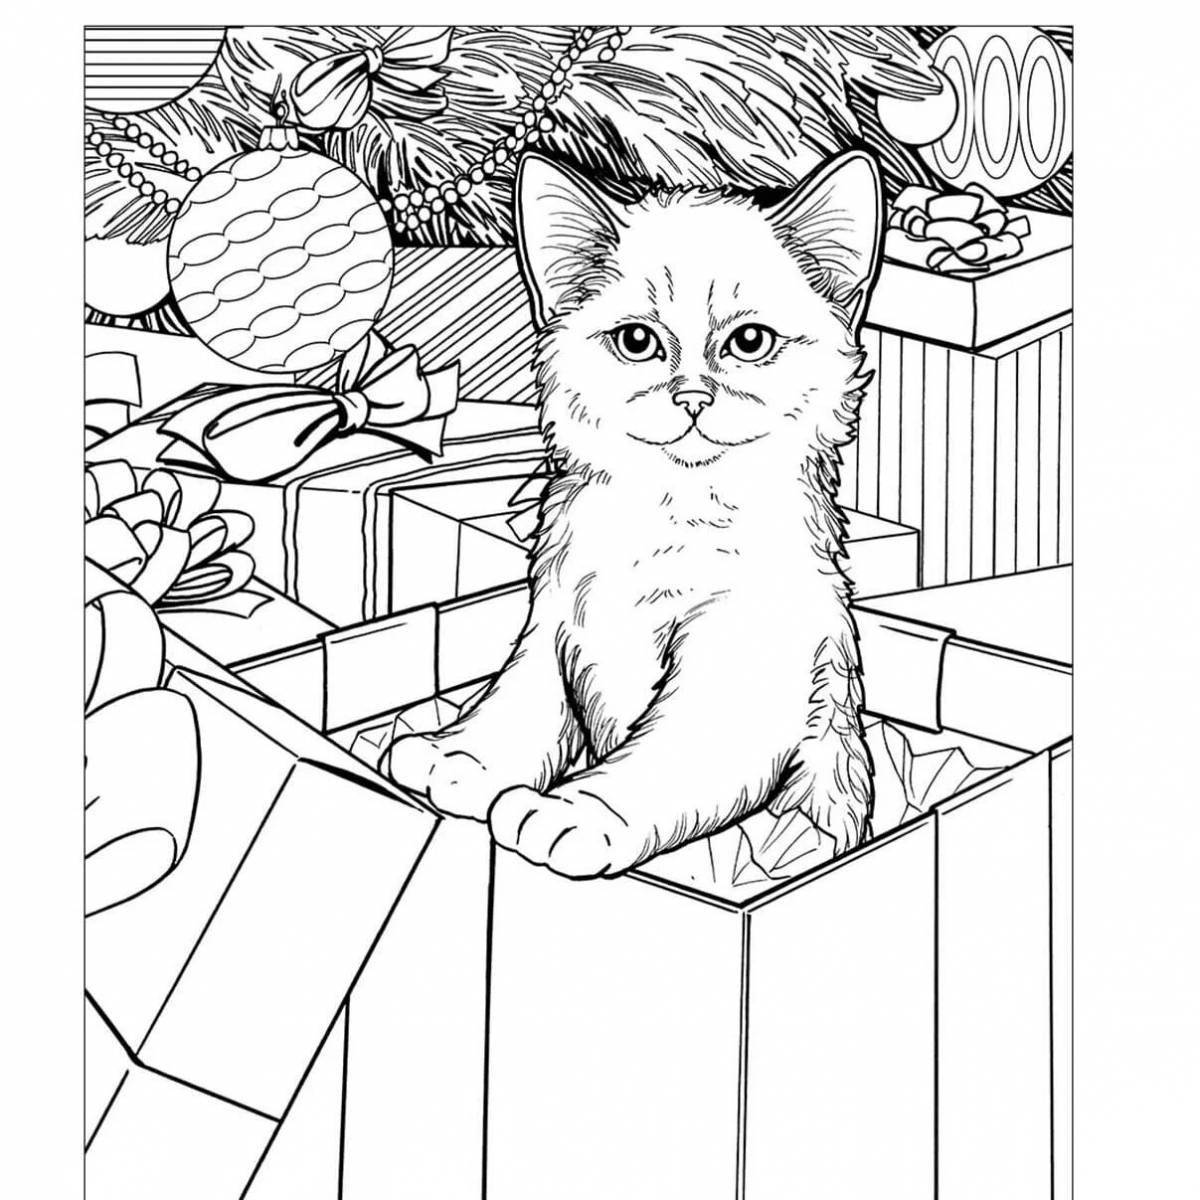 Kitty's festive Christmas coloring book